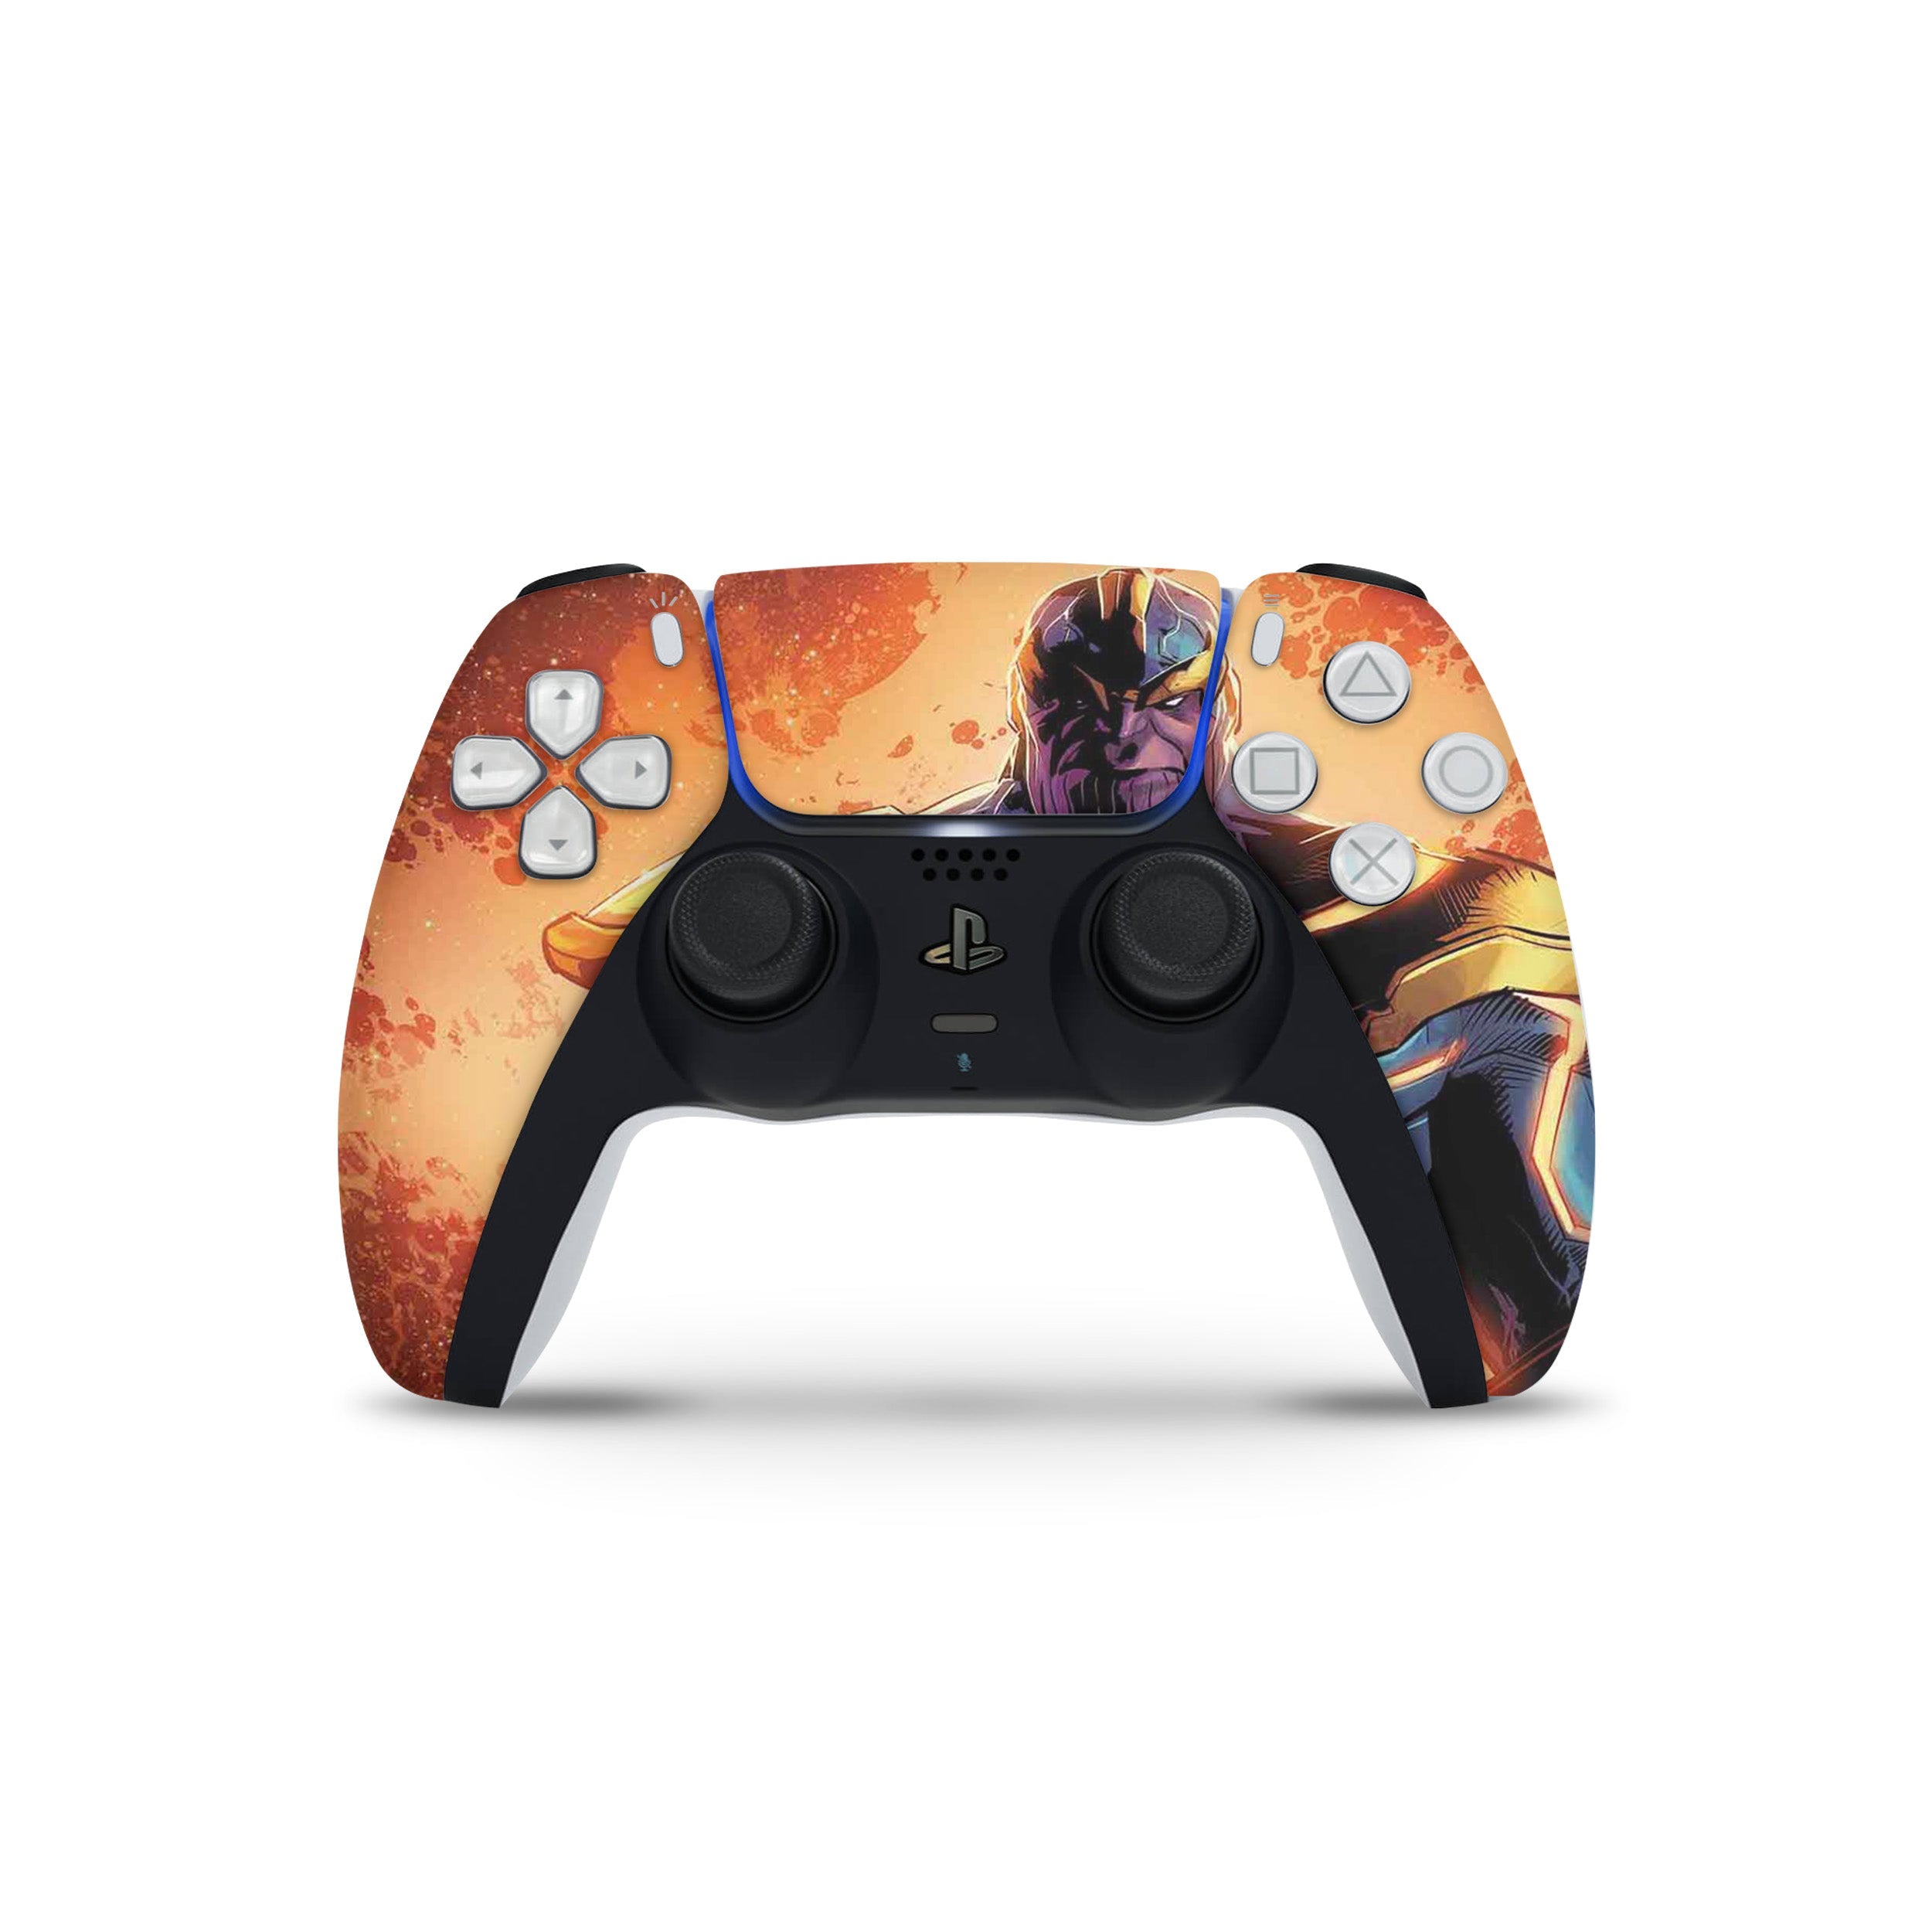 A video game skin featuring a Marvel Thanos design for the PS5 DualSense Controller.